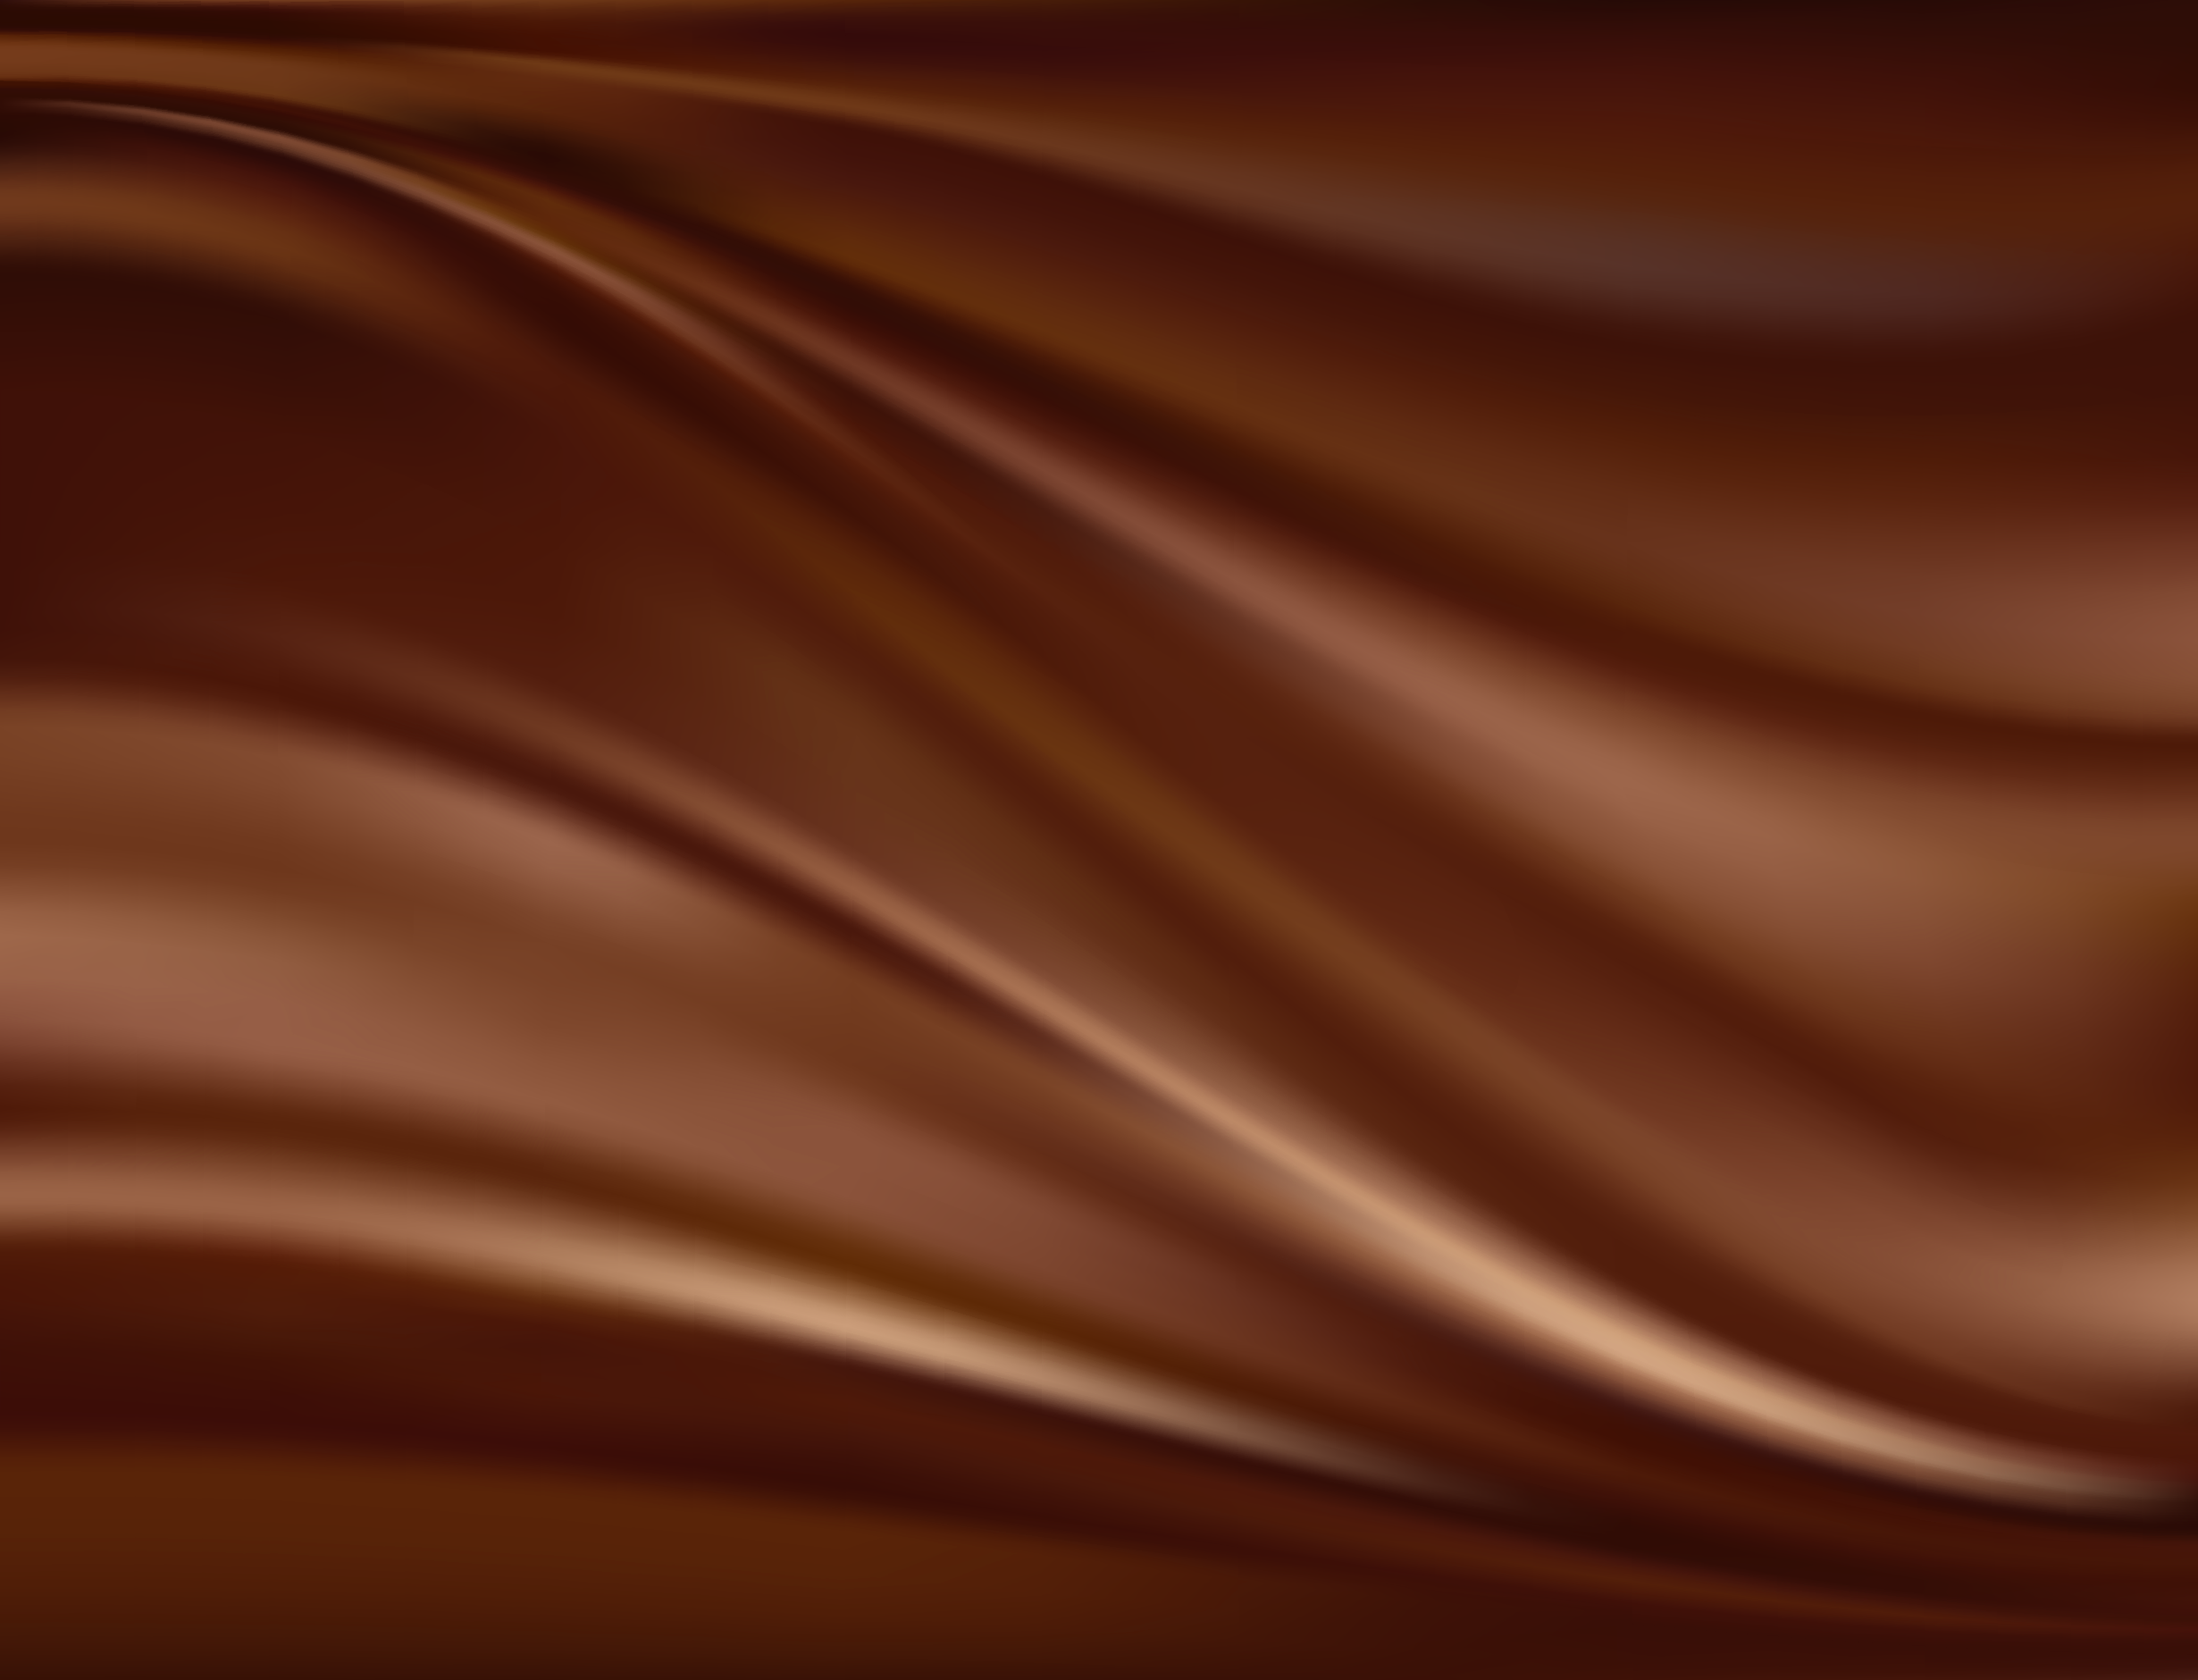 Chocolate Background Gallery Yopriceville High Quality Image